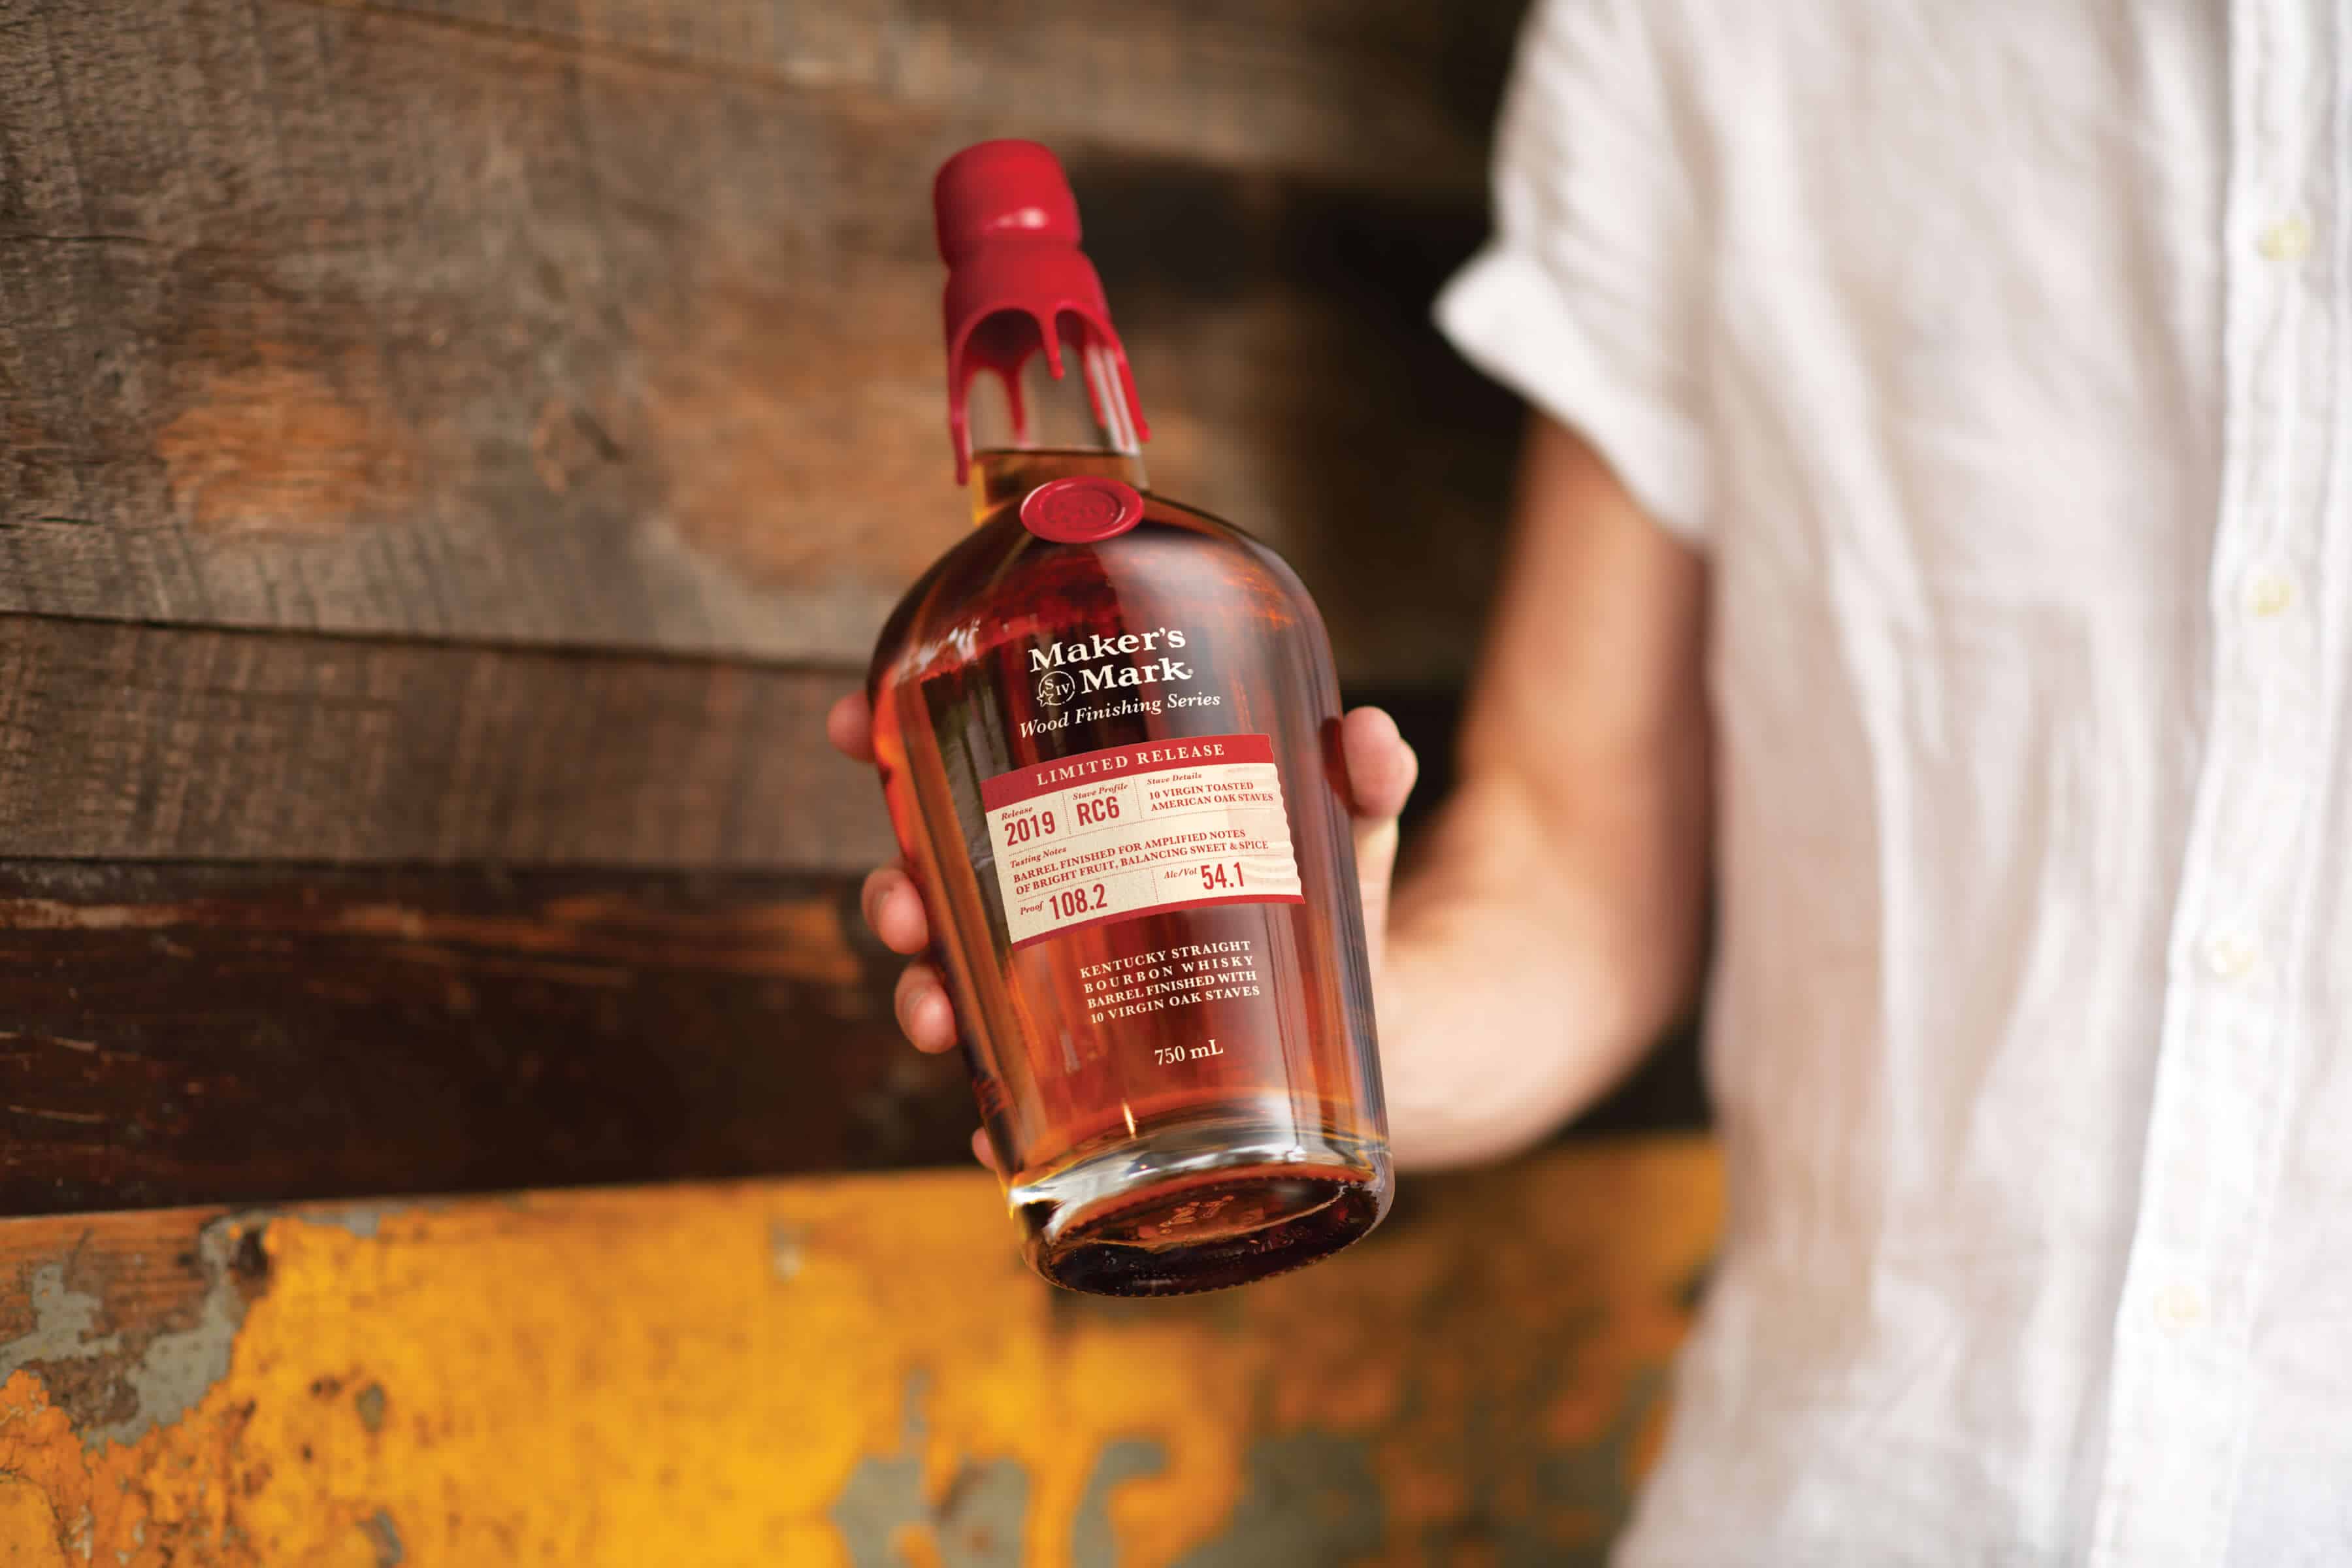 mm rc6 bottle 48689994197 o - MAKER’S MARK® INTRODUCES ITS FIRST-EVER NATIONALLY AVAILABLE LIMITED RELEASE BOURBON